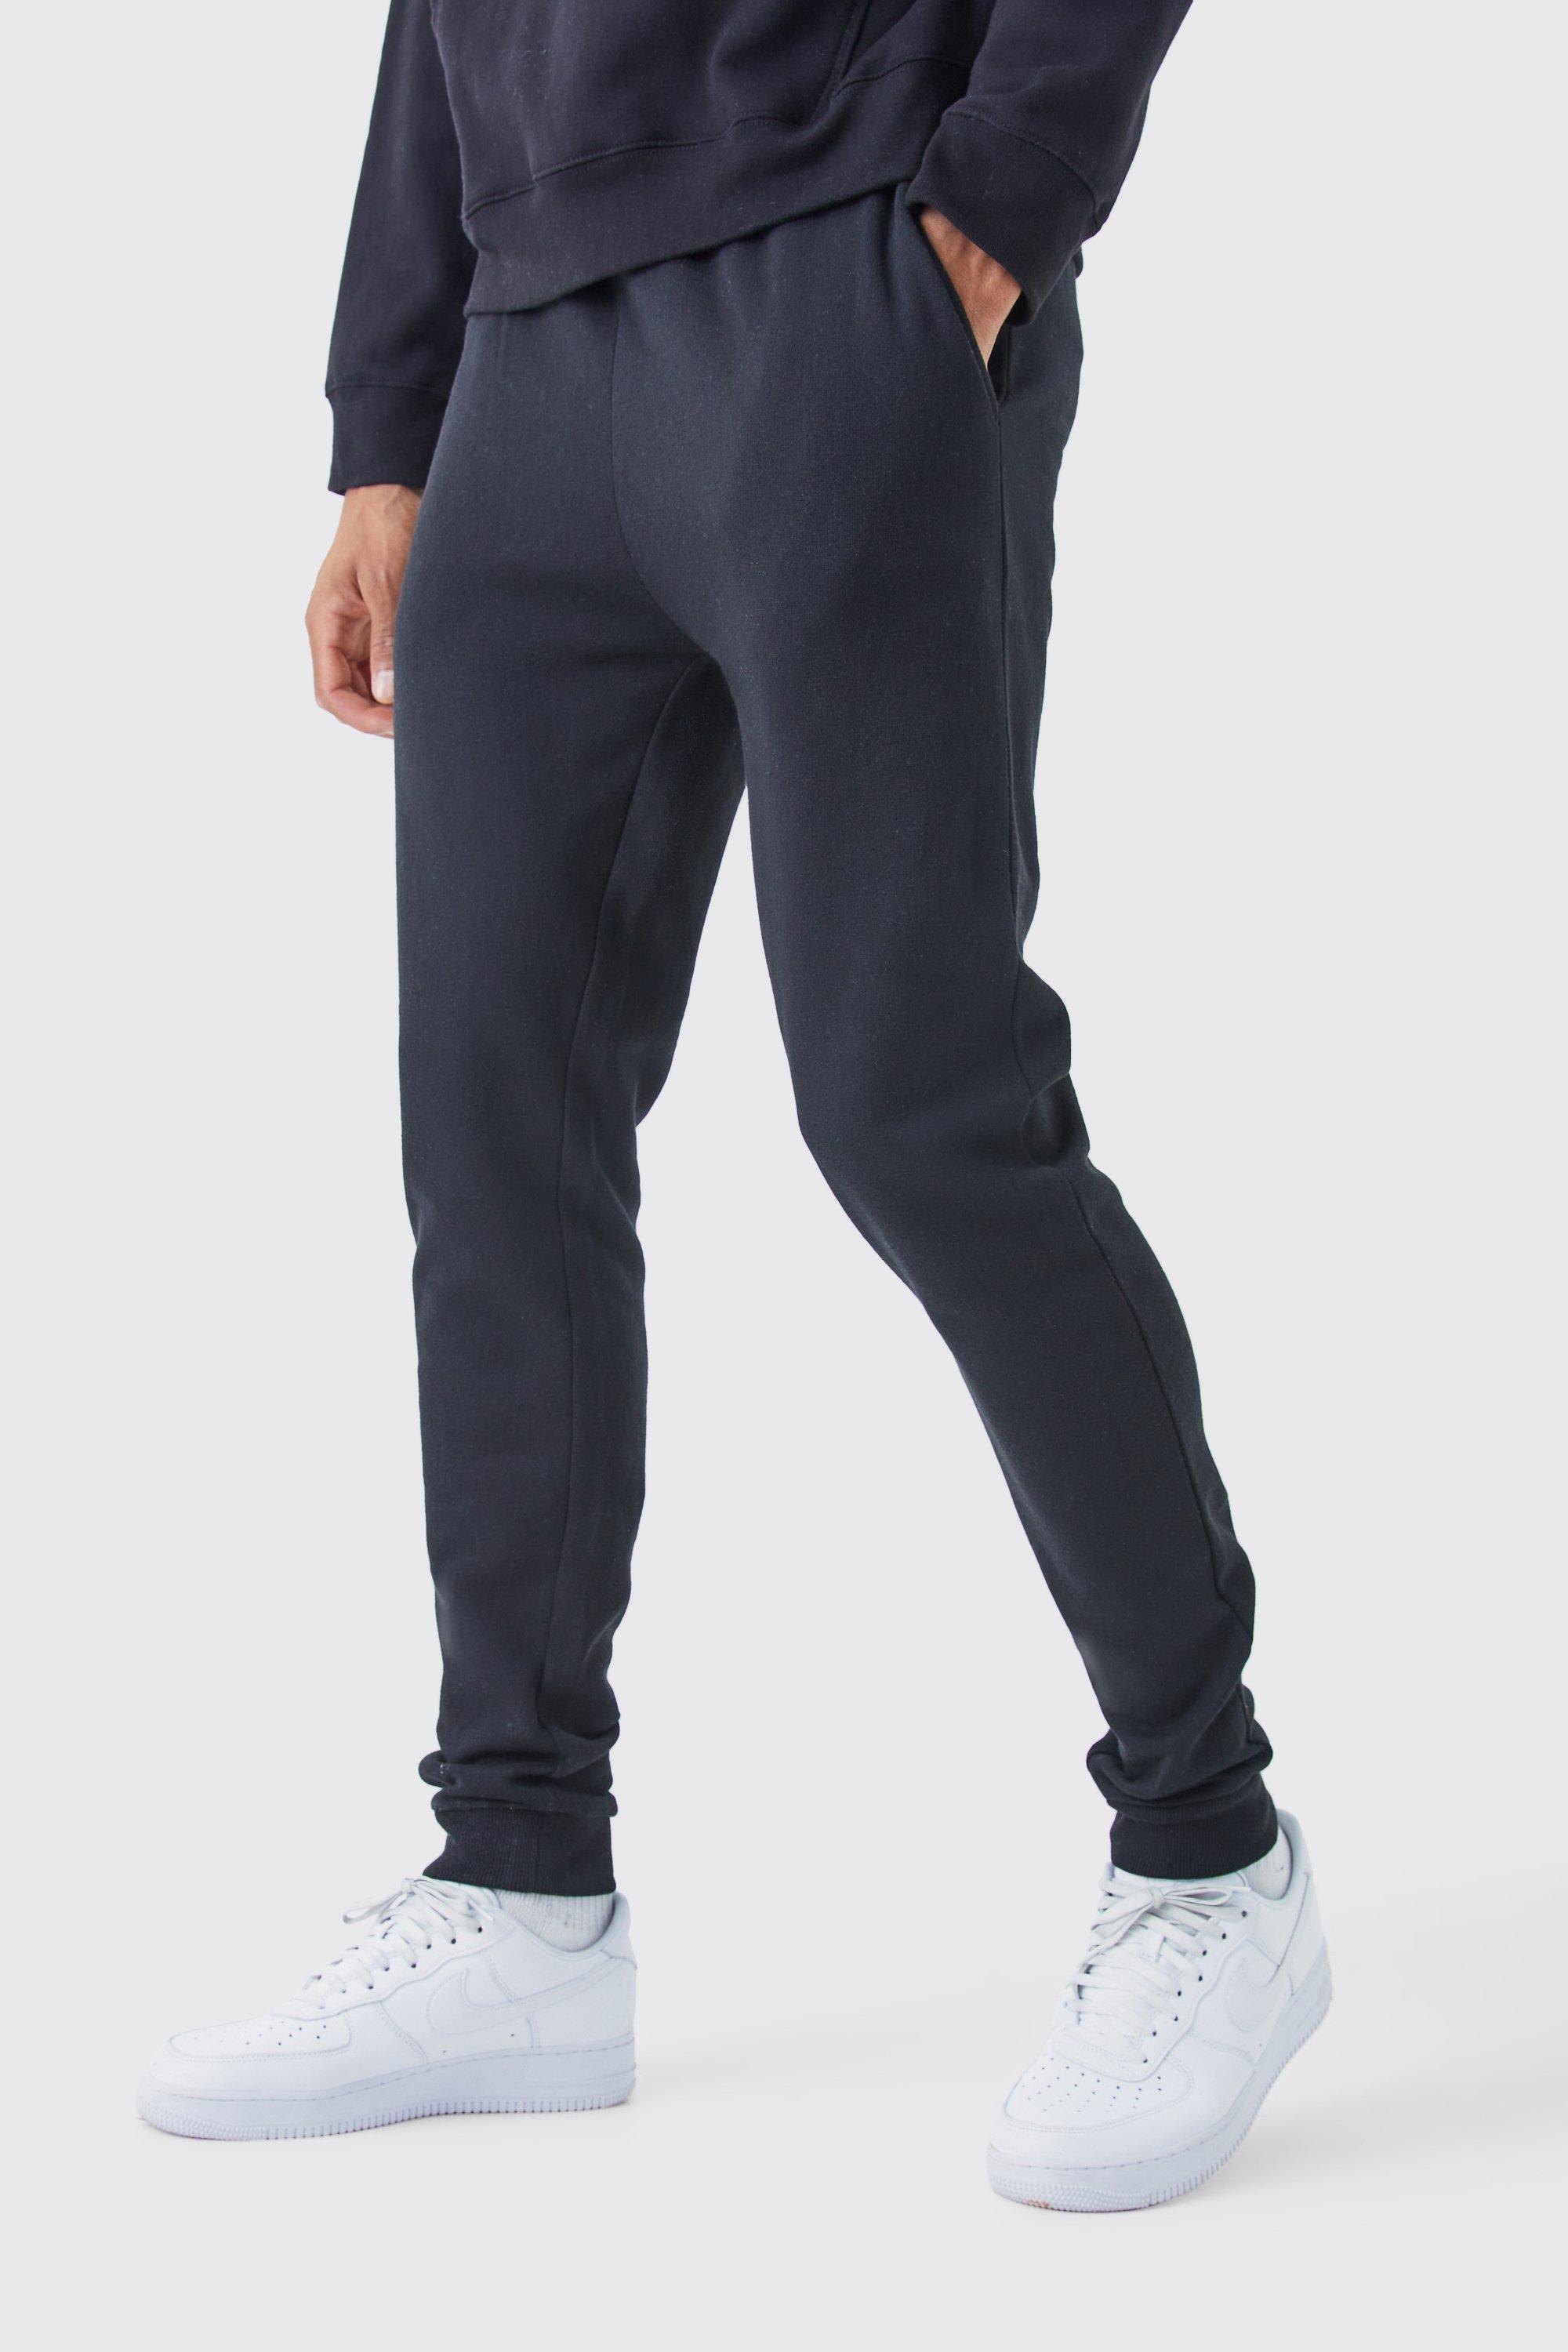 Tall Skinny Fit Cargo Jogger